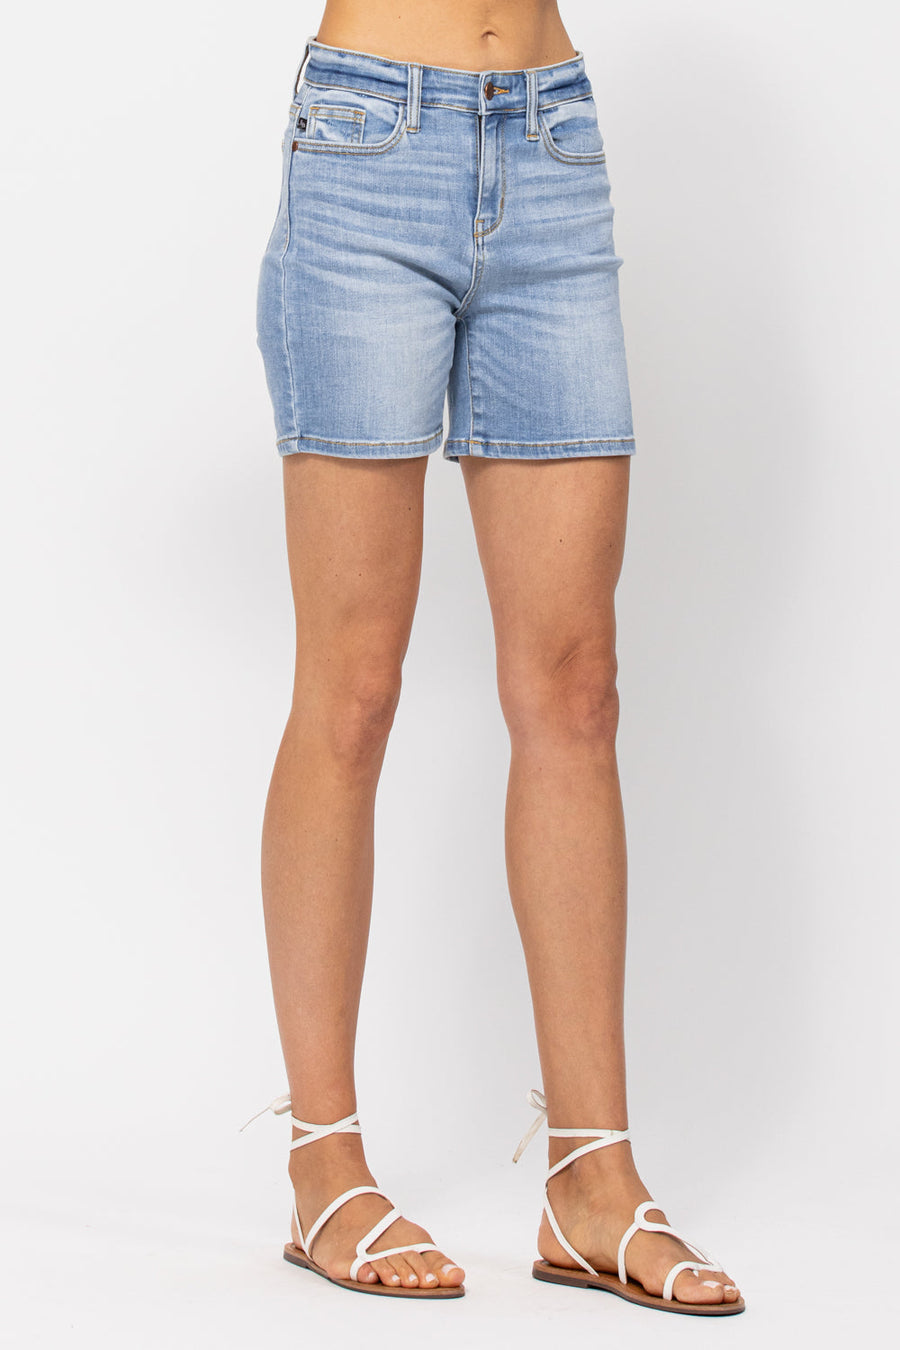 Indie Mid Length Shorts - PLUS